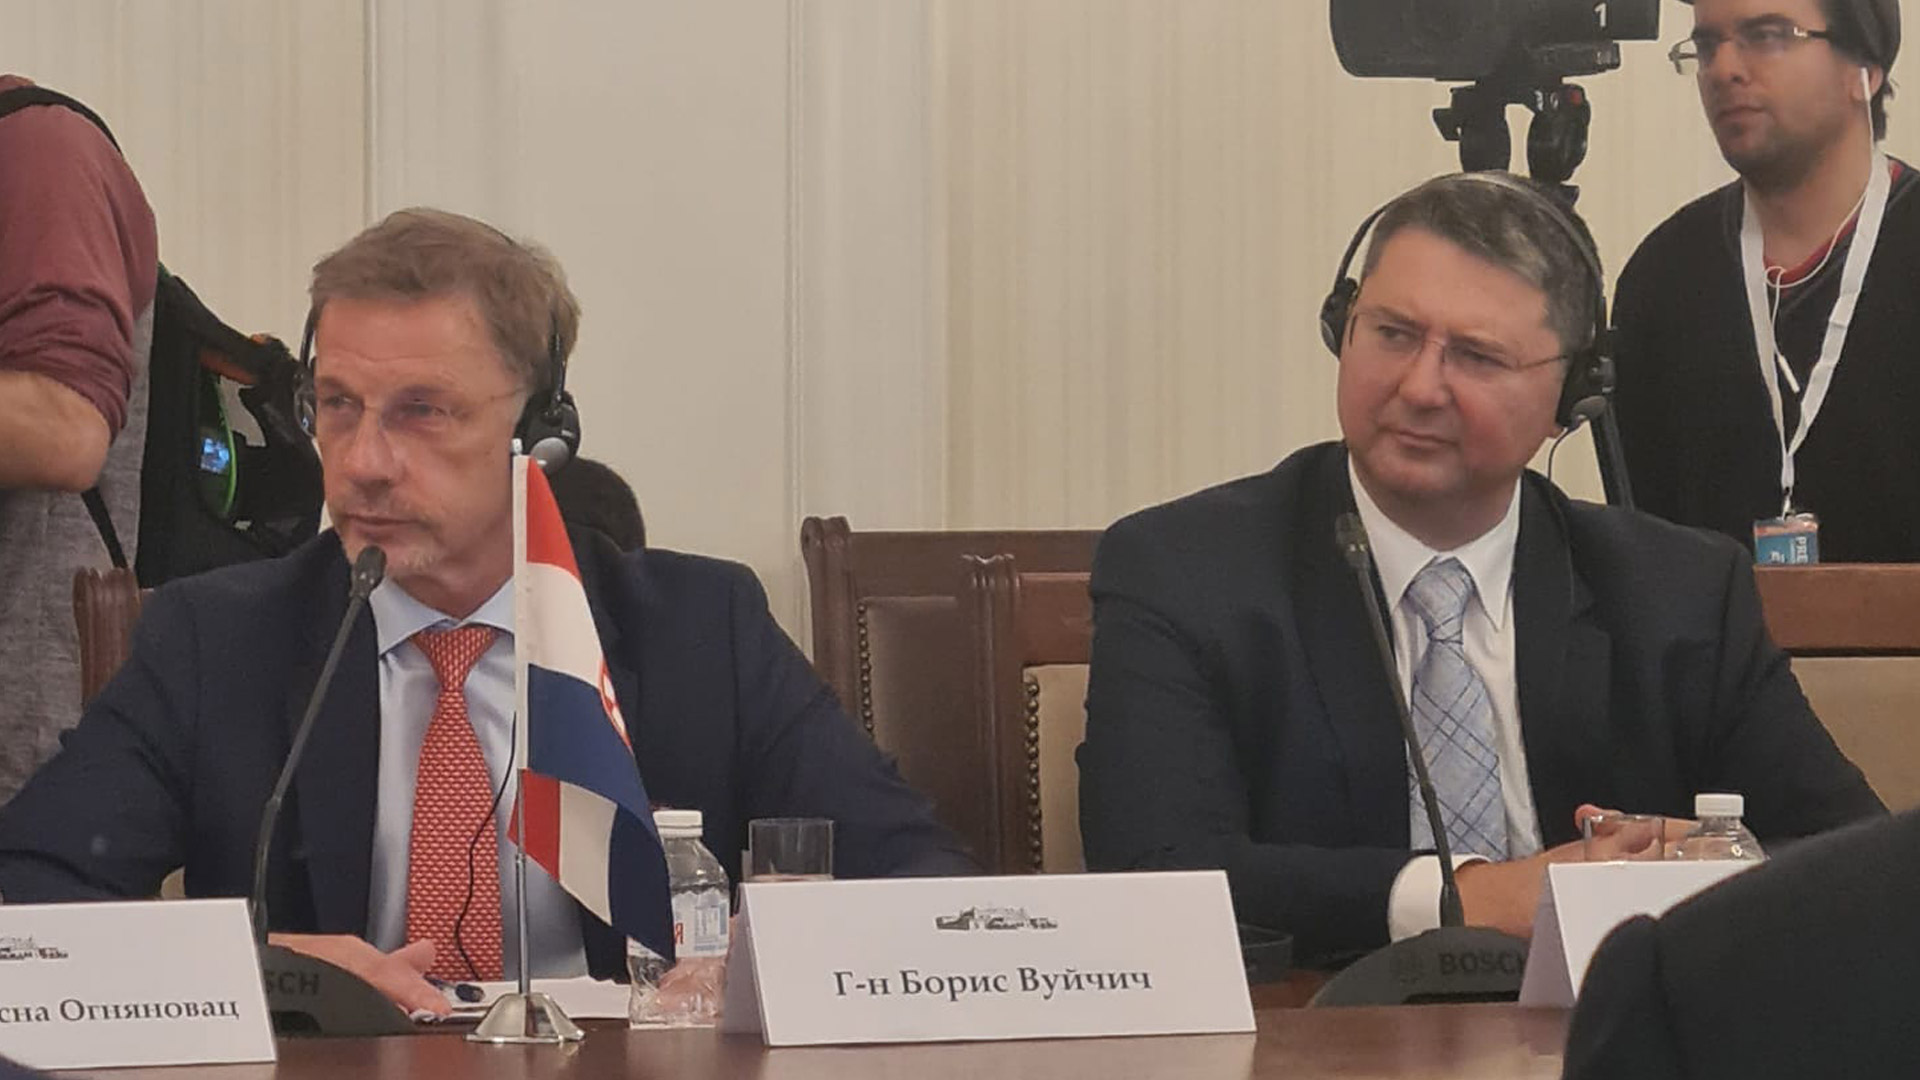 Governor Vujčić's presentation at the Committee on the European Union Affairs, the Schengen area and the Еuro area of the Parliament of the Republic of Bulgaria on the topic of Croatia's entry into the Eurozone